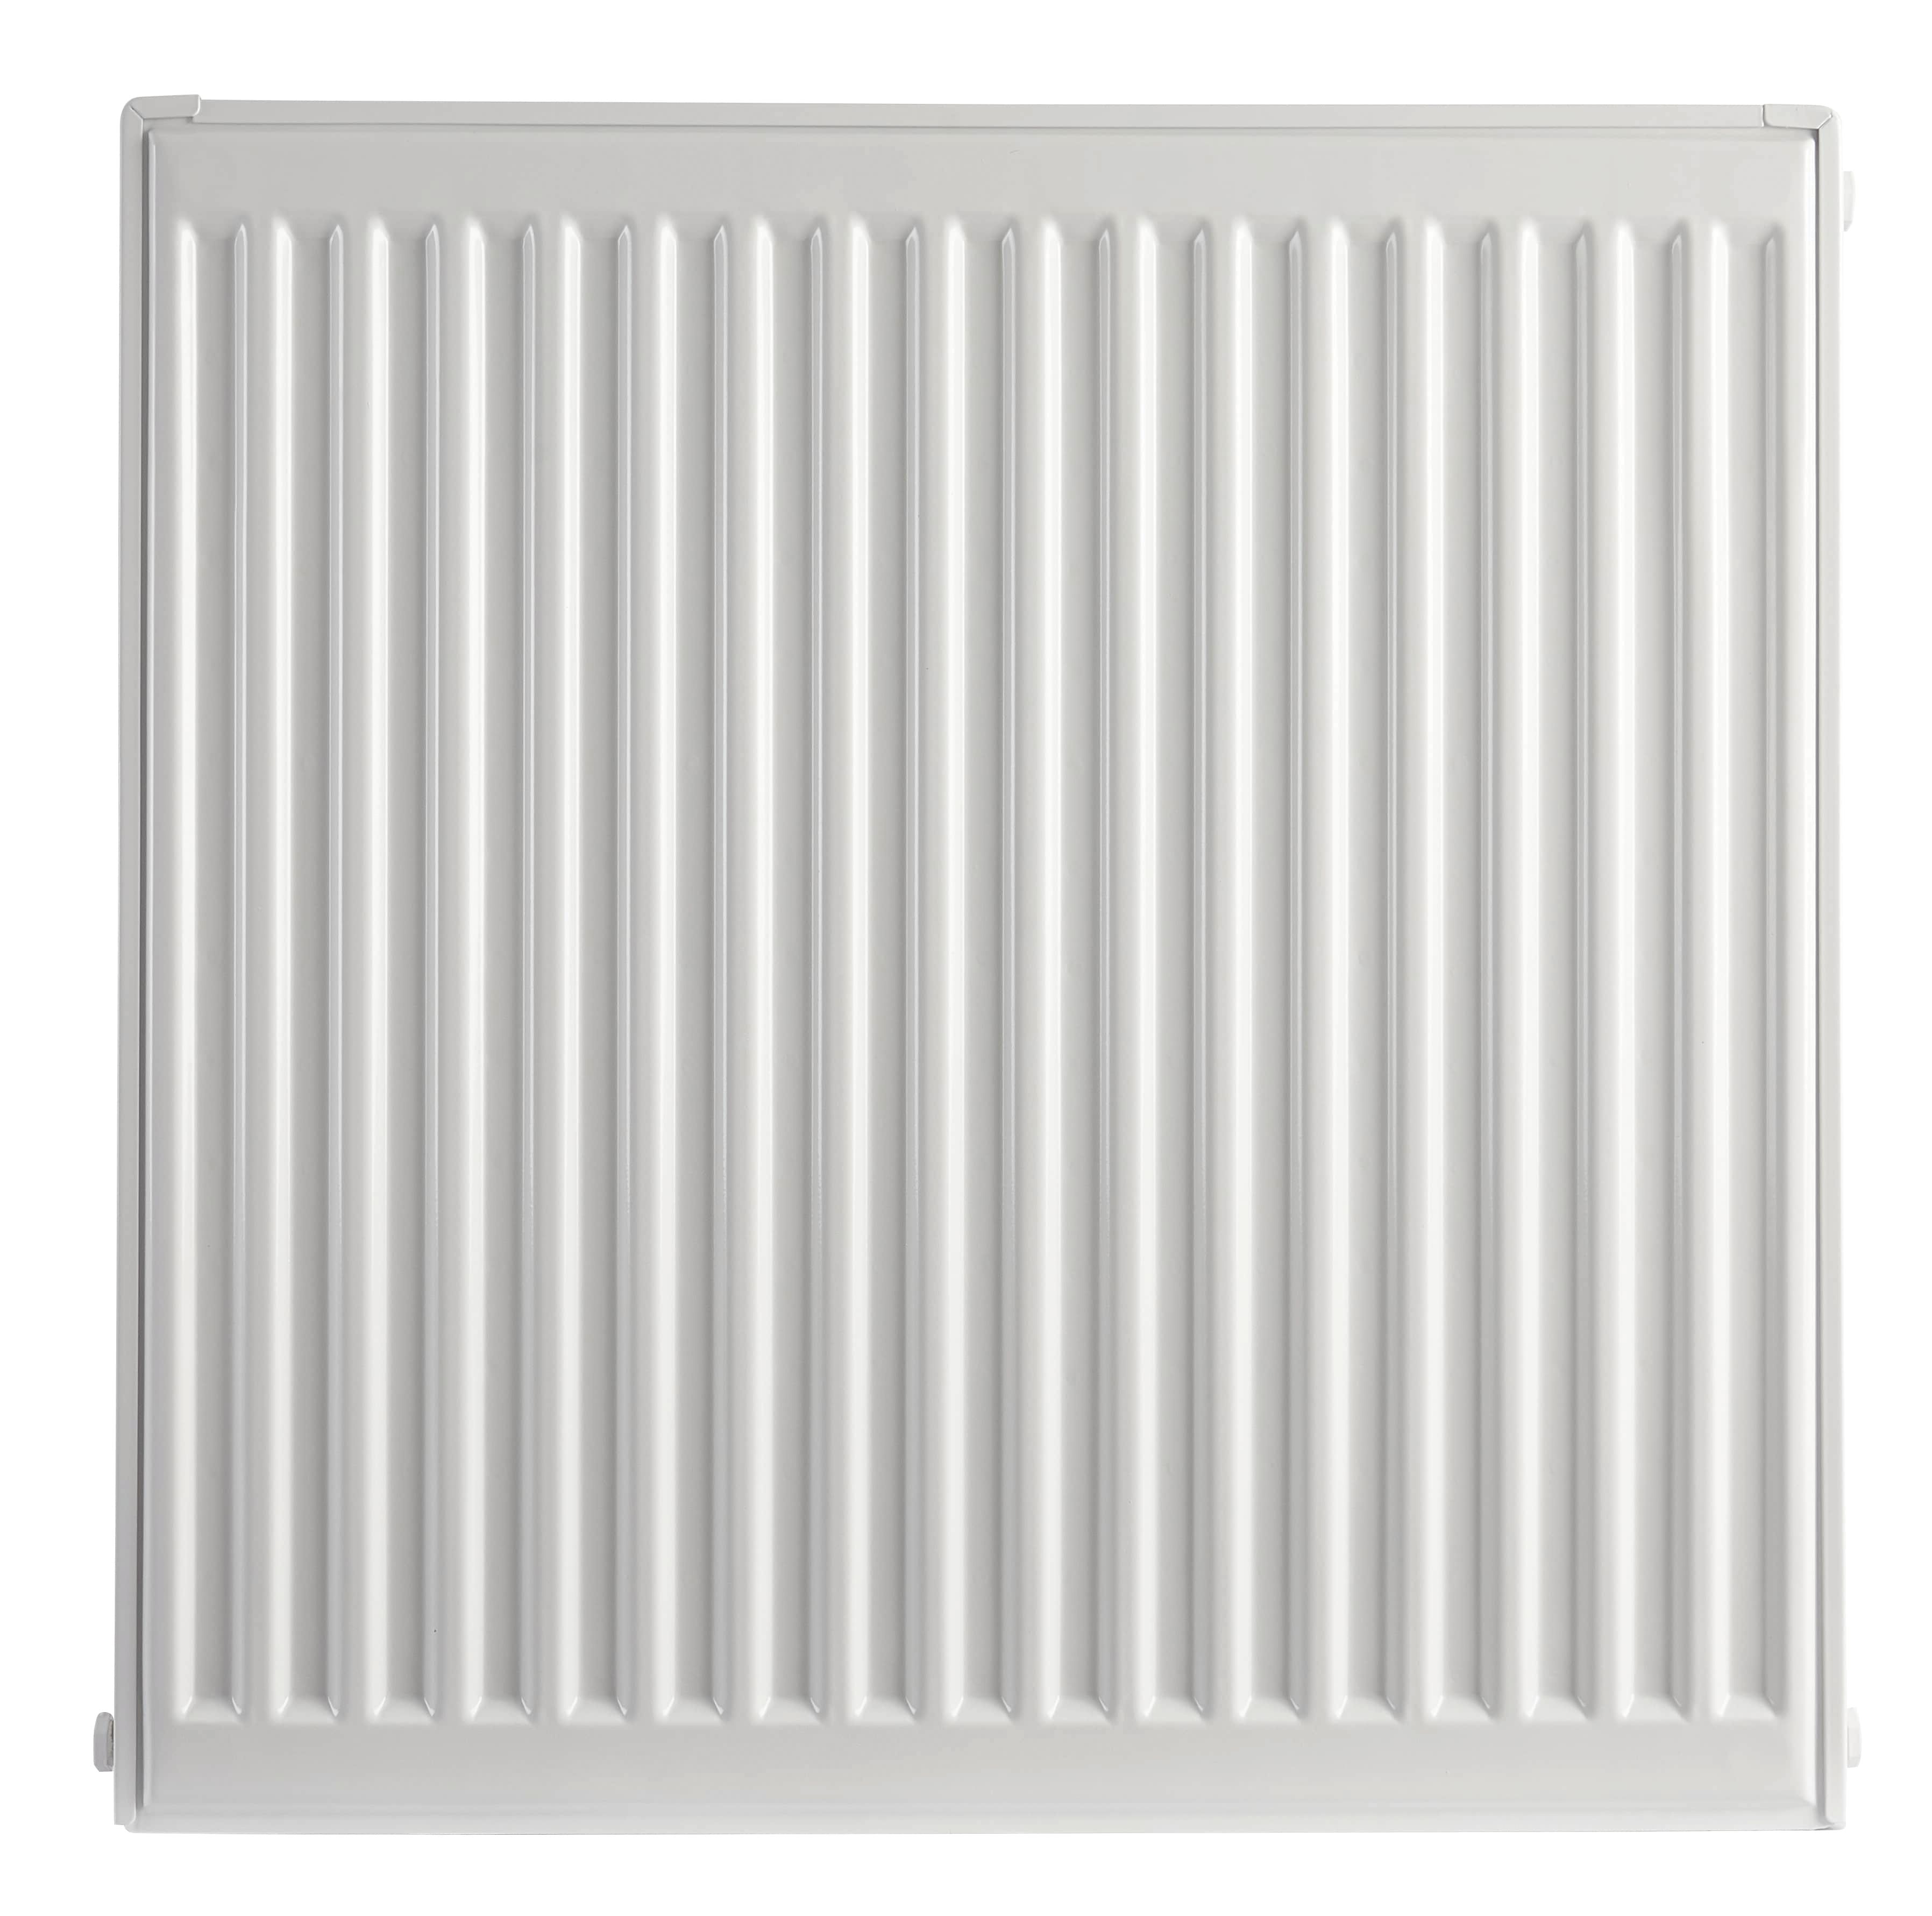 Image of Homeline by Stelrad 600 x 600mm Type 11 Single Panel Single Convector Radiator